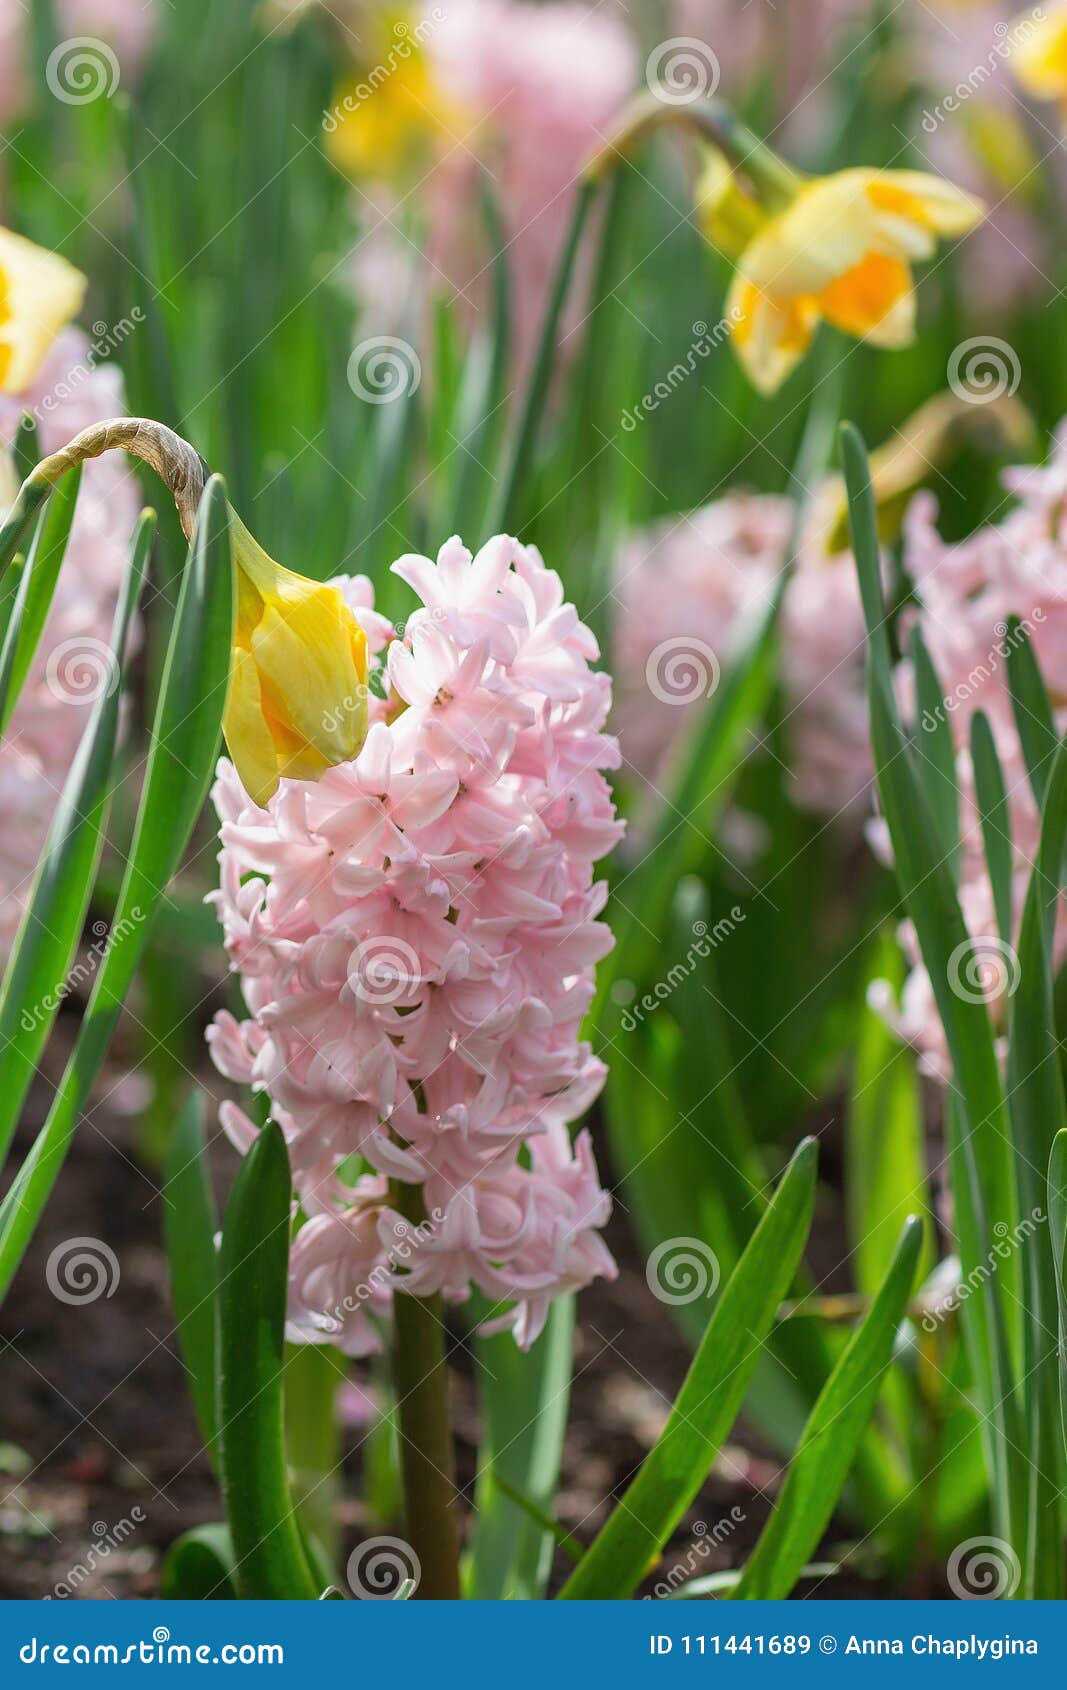 Pink Hyacinths And Yellow Narcissus In A Dutch Park Spring Concept Close Up Selective Focus Stock Image Image Of Blossom Flora 111441689